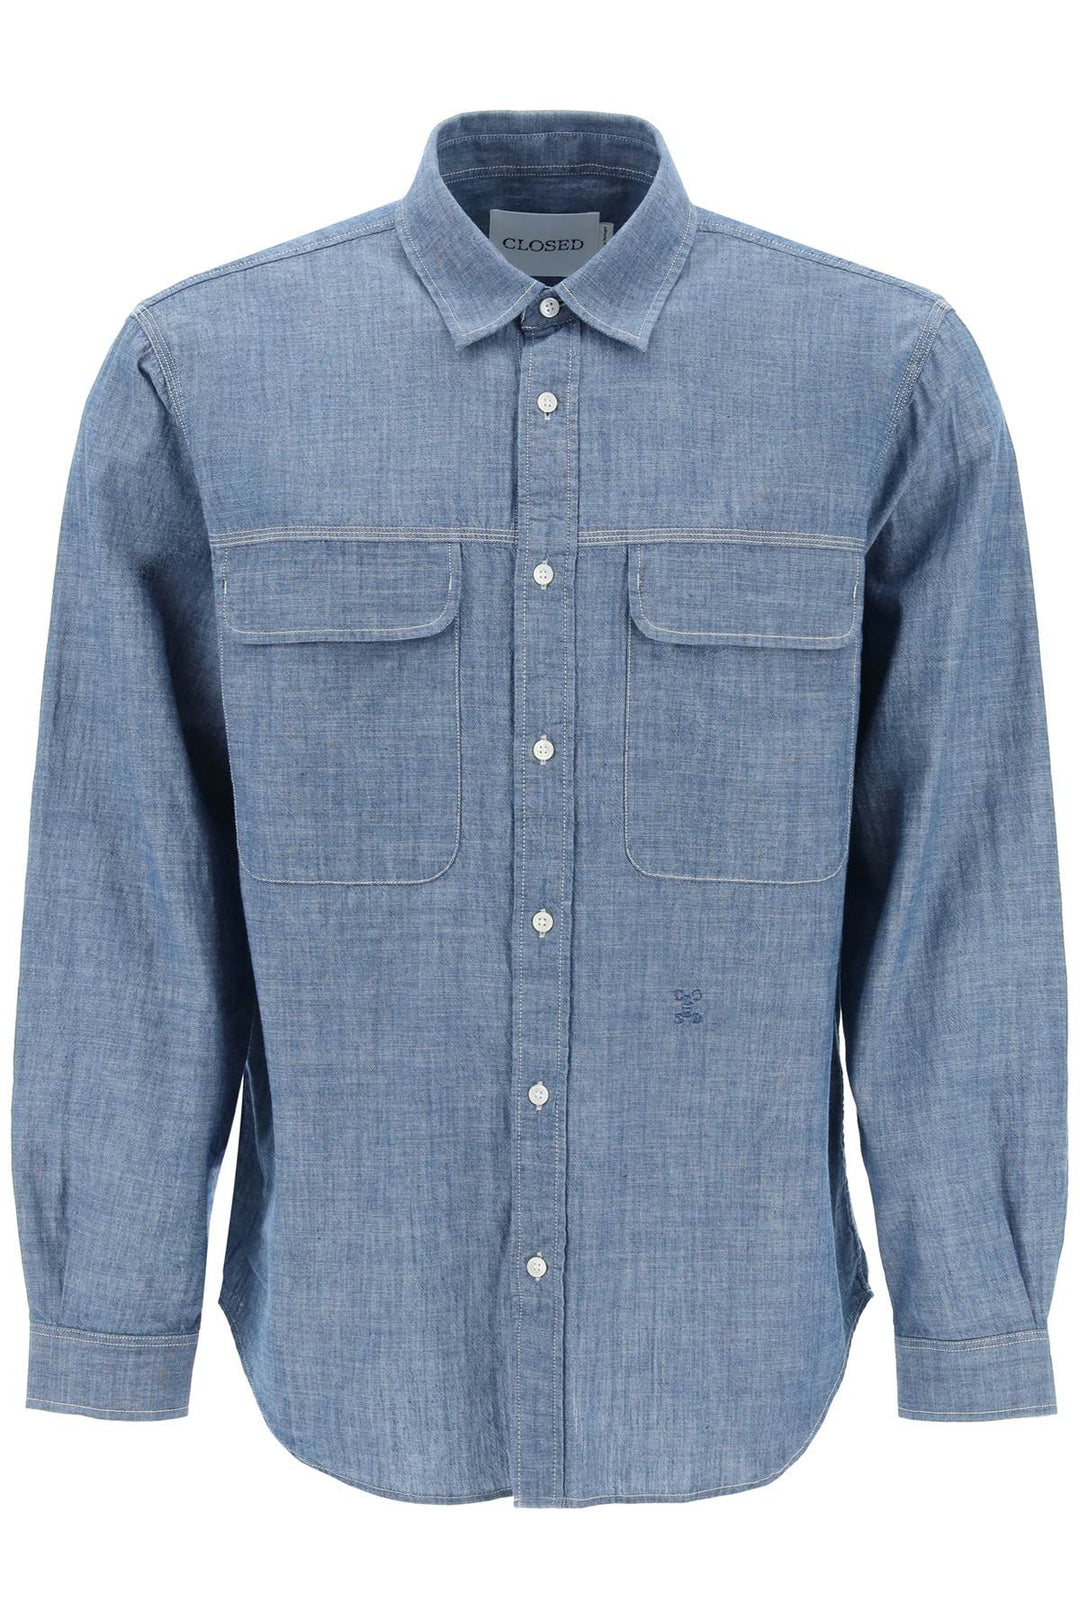 Closed cotton chambray shirt for-0